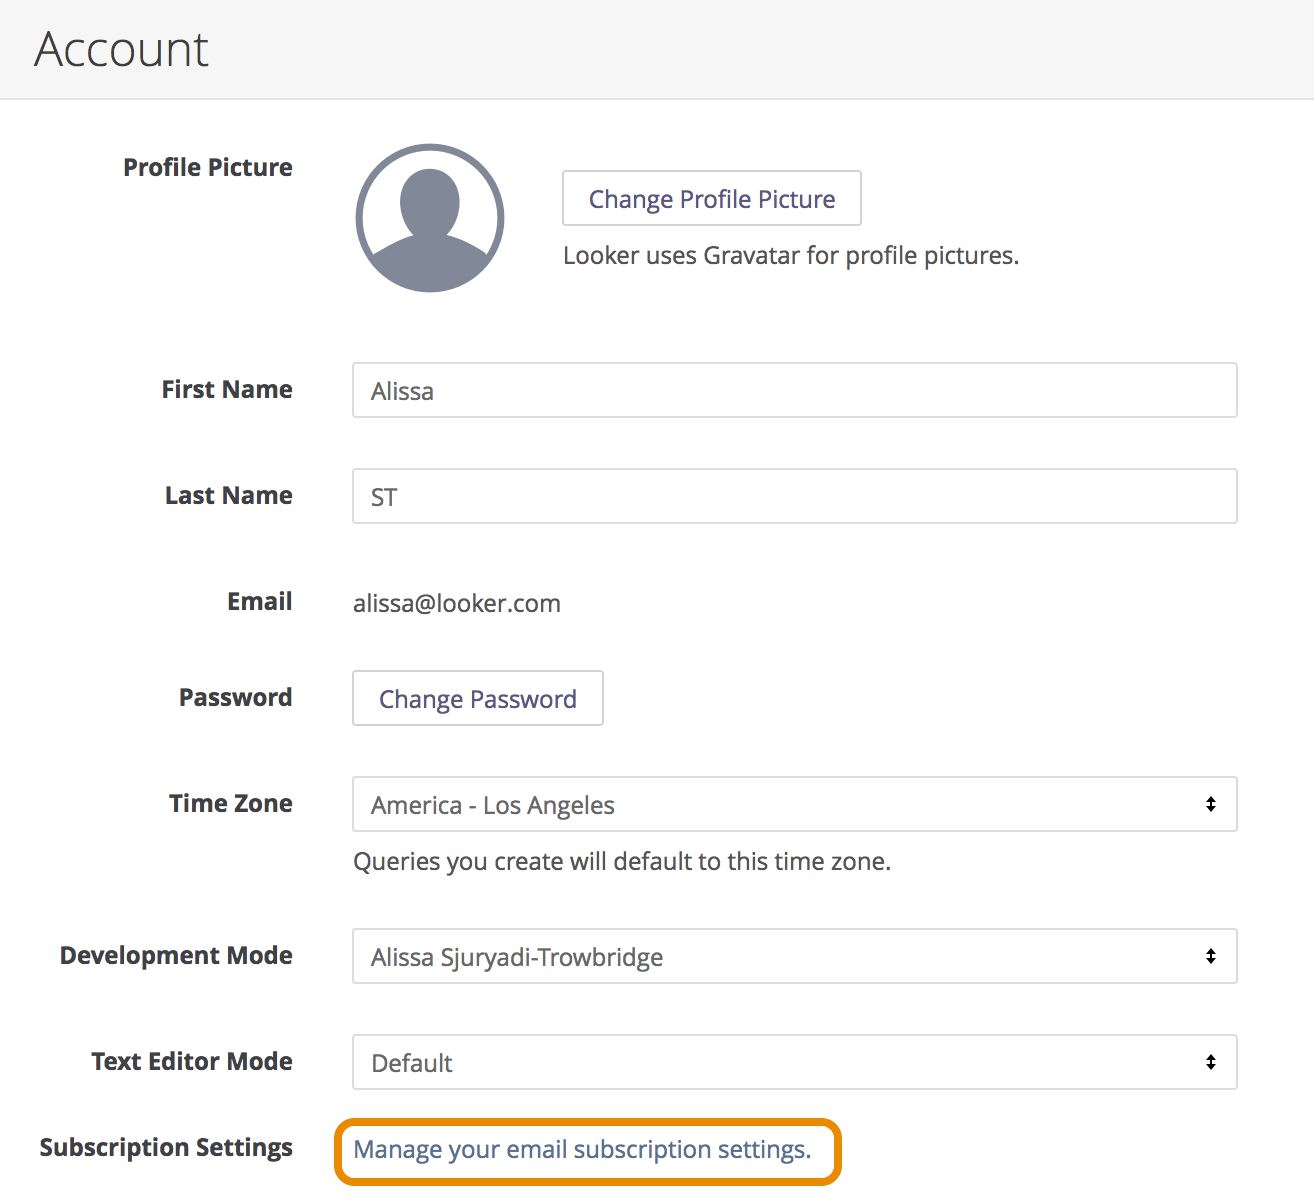 A screenshot of the Looker Account page. One of the fields is titled Subscription Settings, next to which is a link titled Manage your email subscription settings.